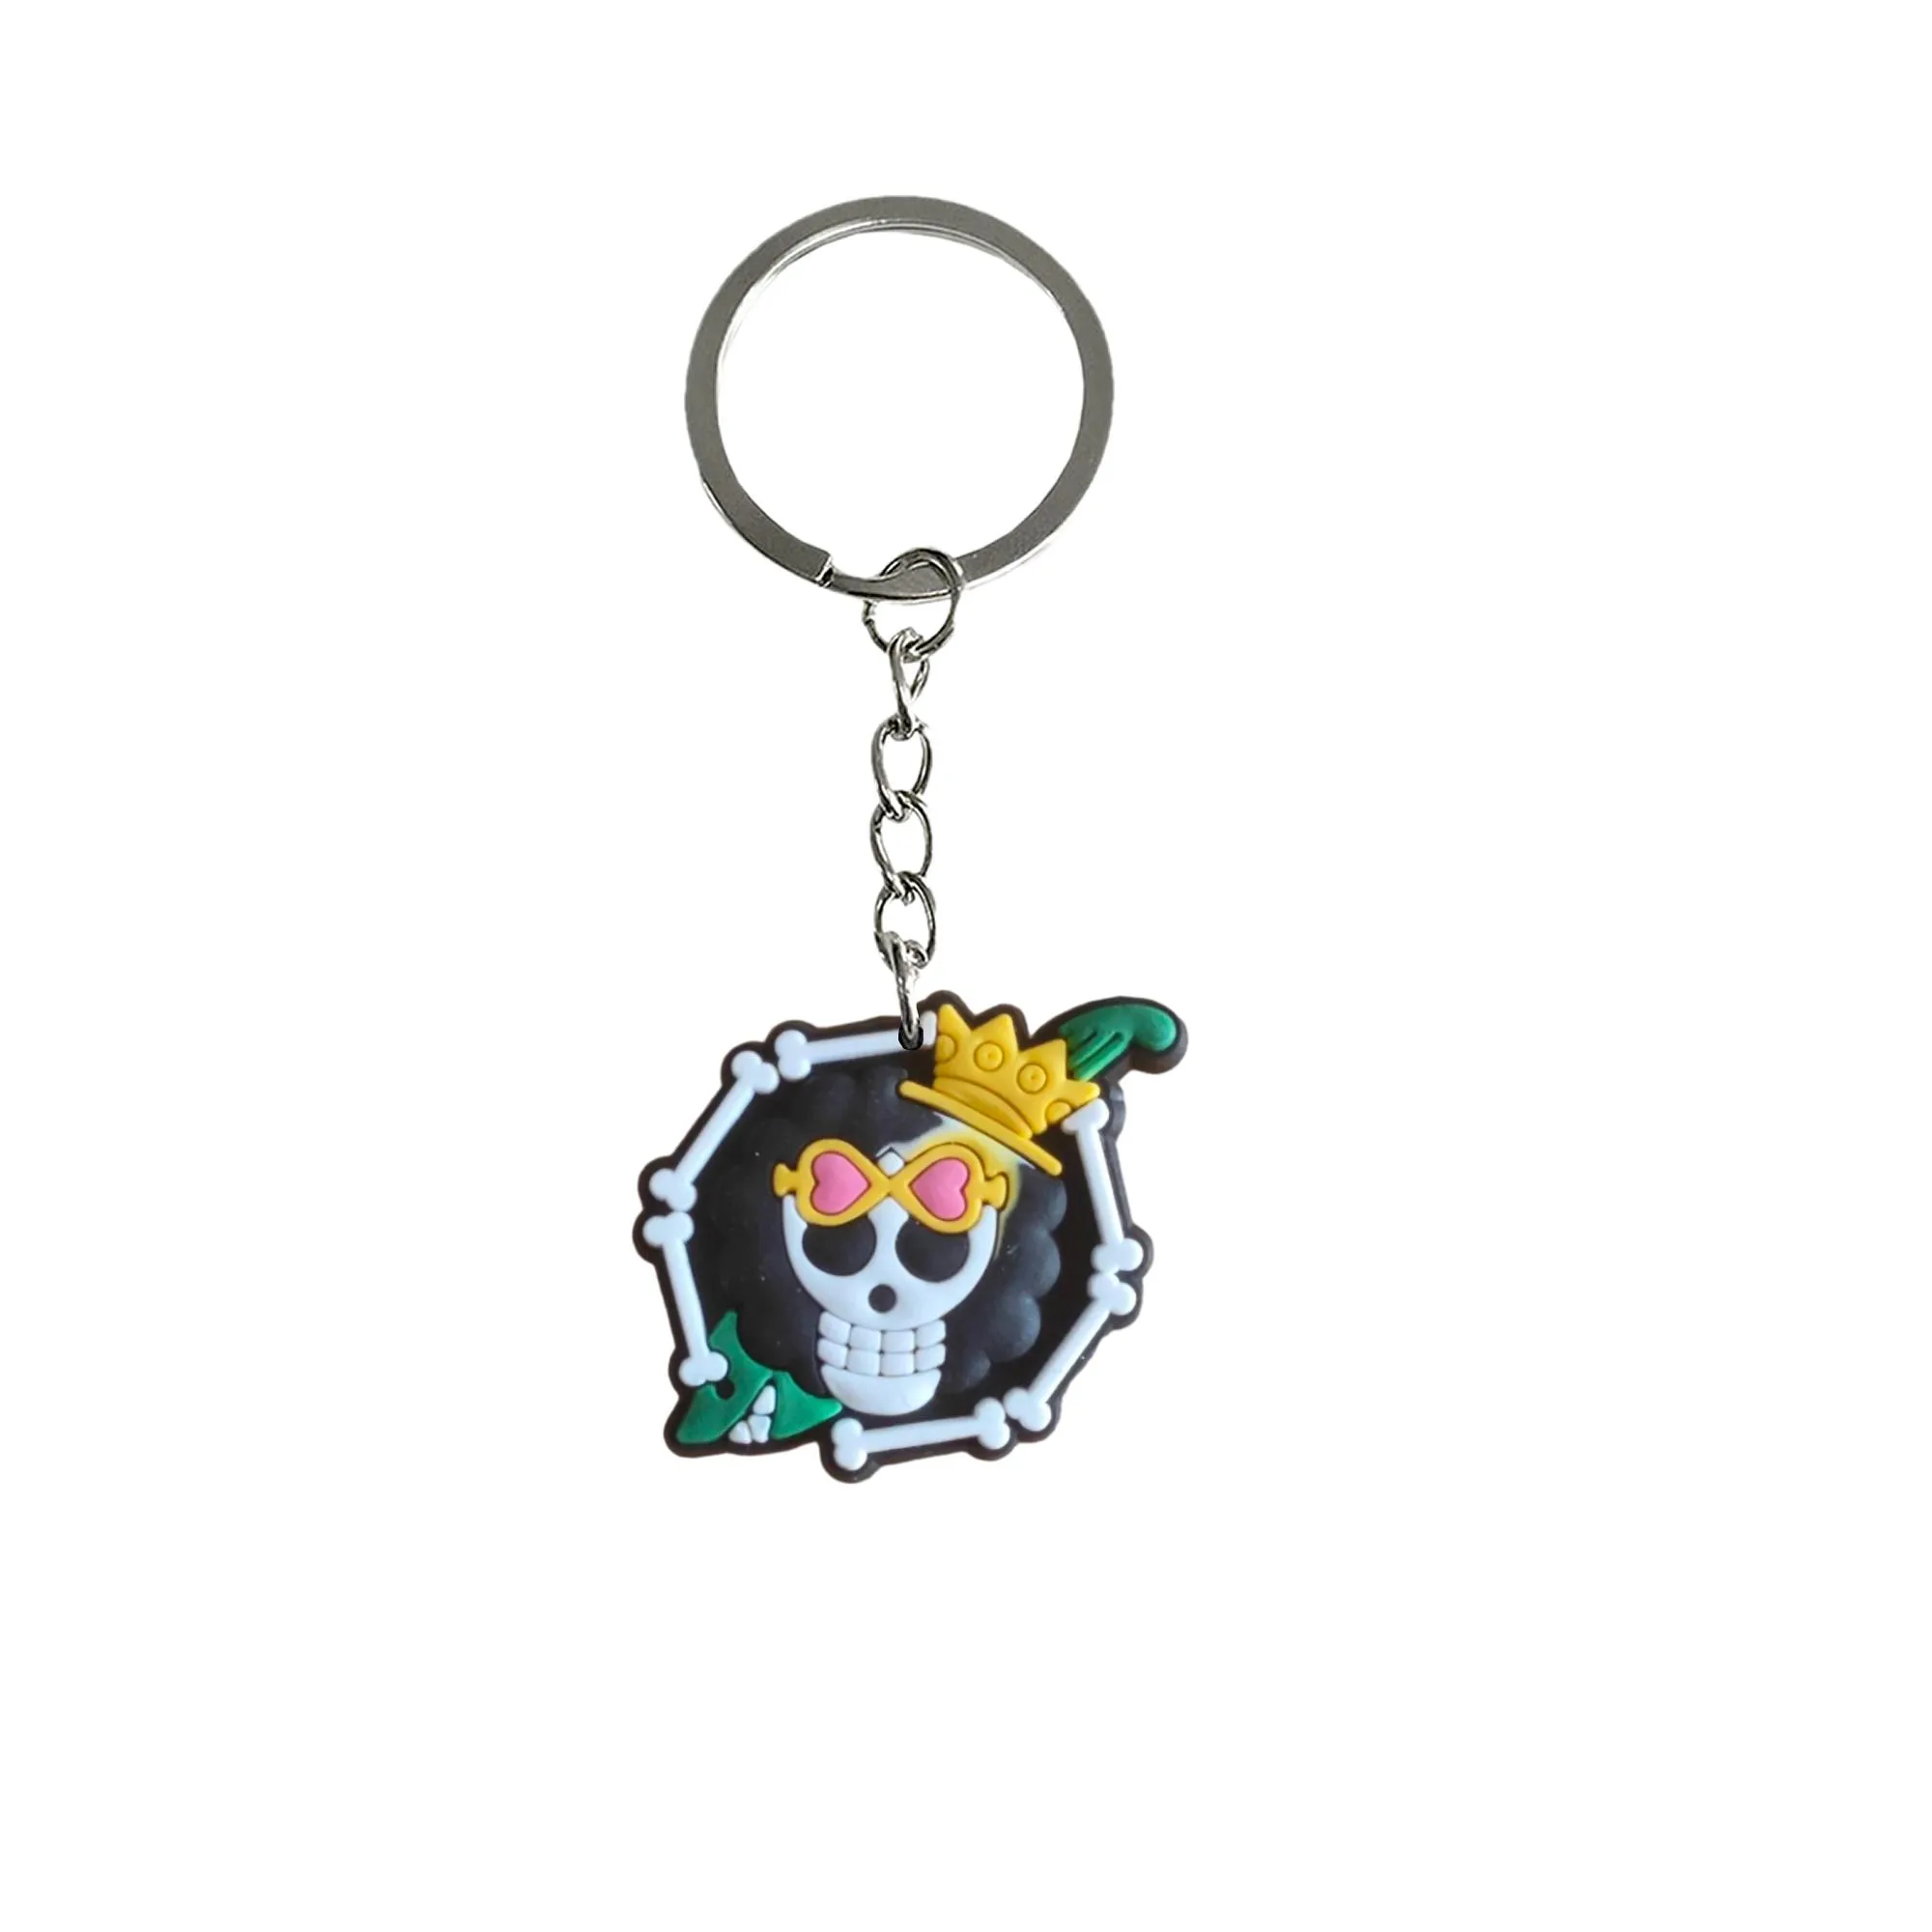 skull head 16 keychain keychains for goodie bag stuffers supplies keyring school bags backpack suitable schoolbag key chain kid boy girl party favors gift ring men rings